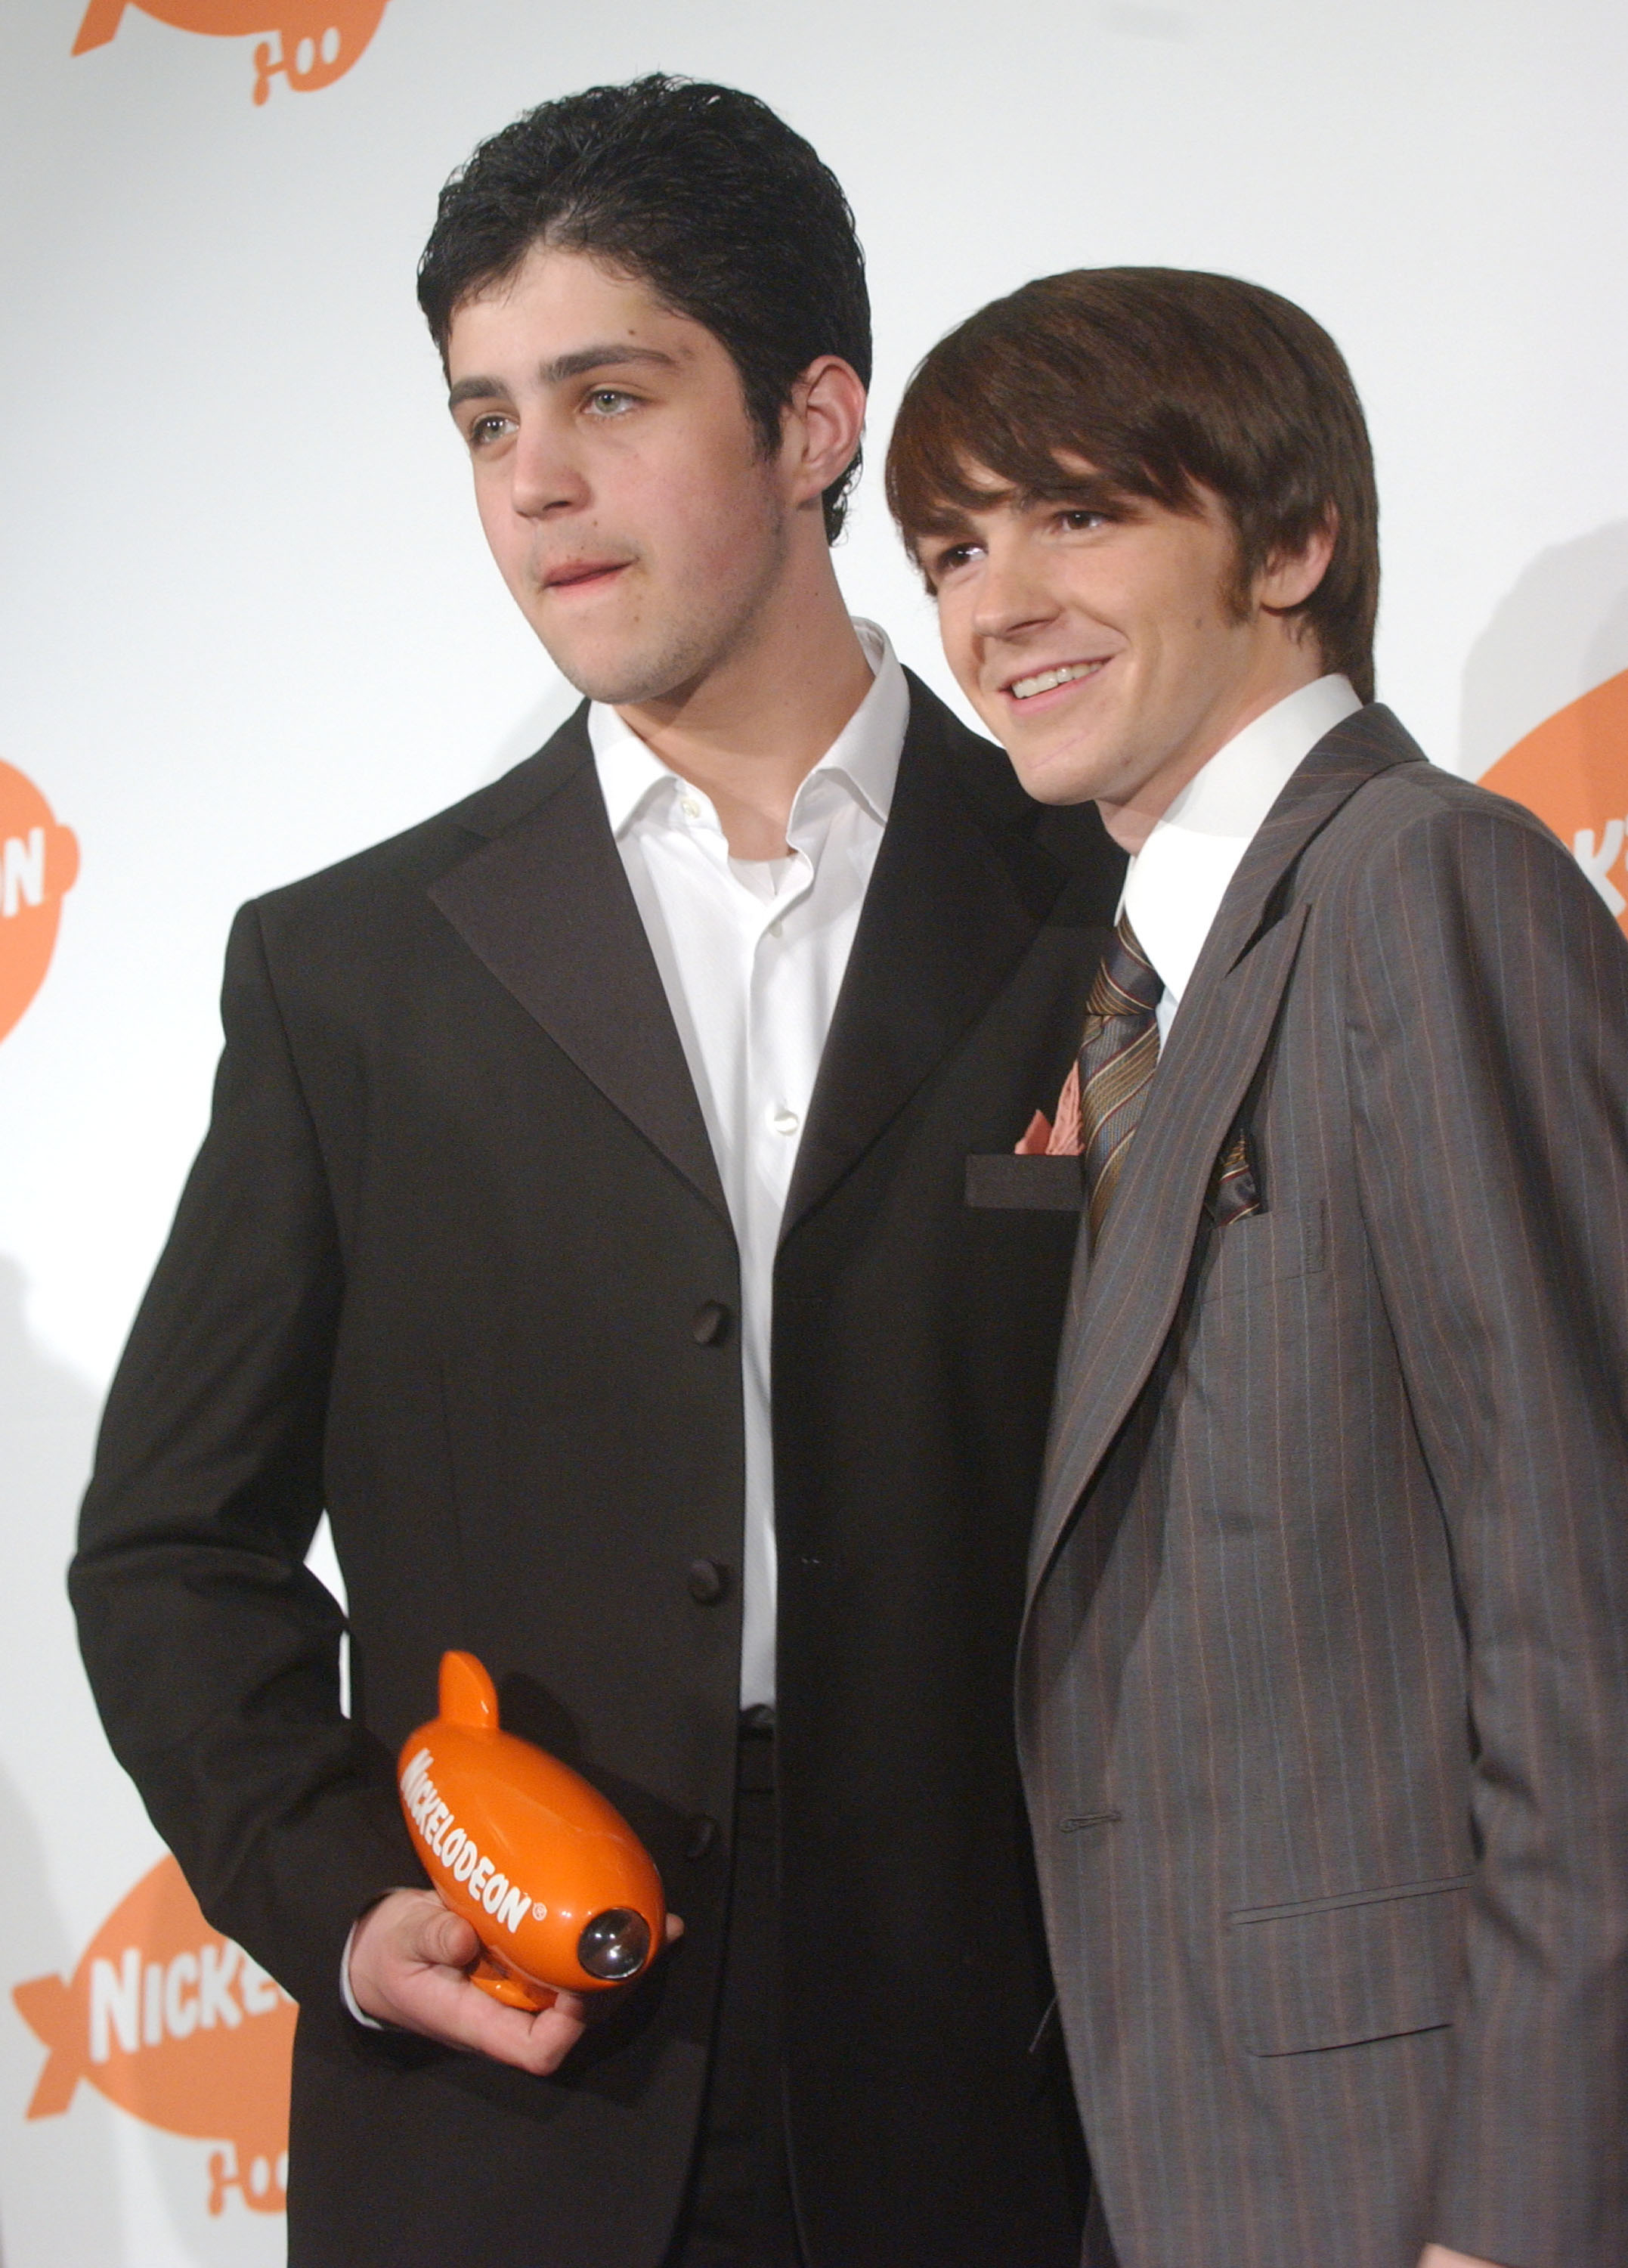 Drake and Josh on the red carpet, while Josh holds their Nickelodeon Award